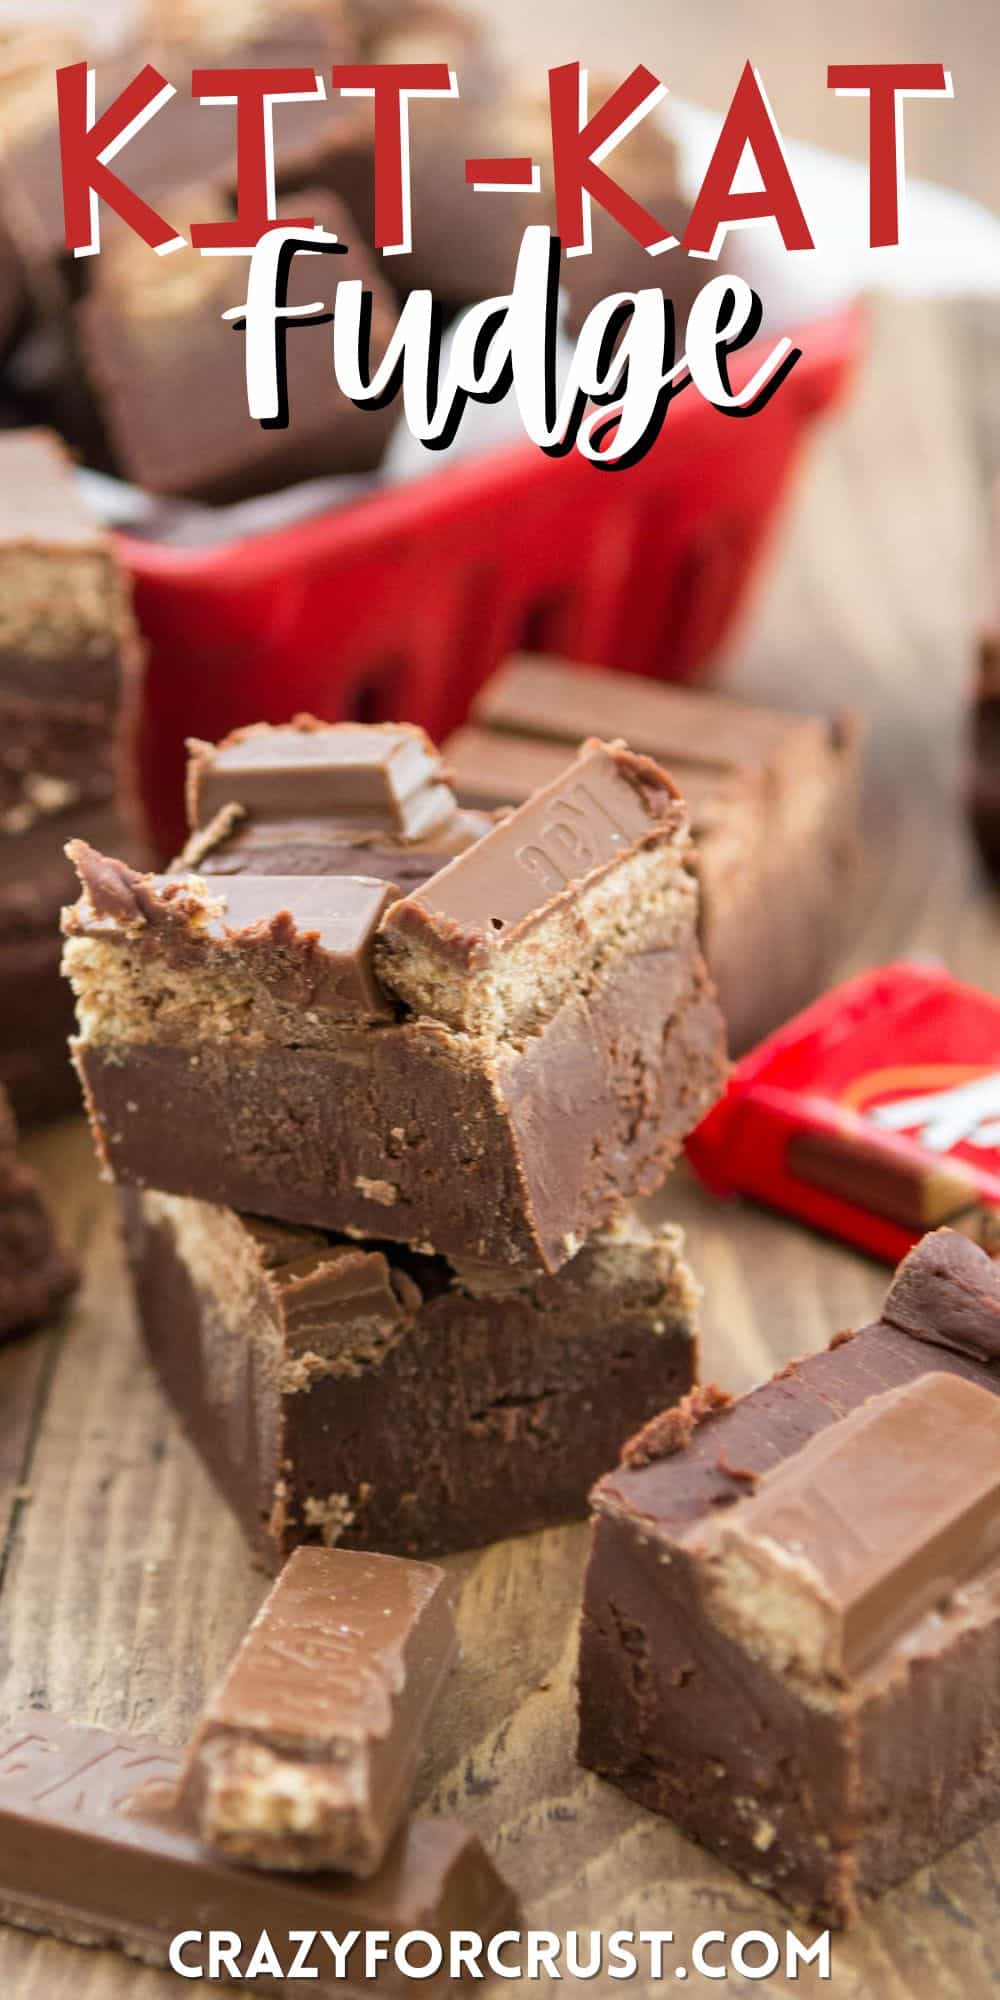 stacked fudge with KitKats on top near wrapped KitKats with words on the image.